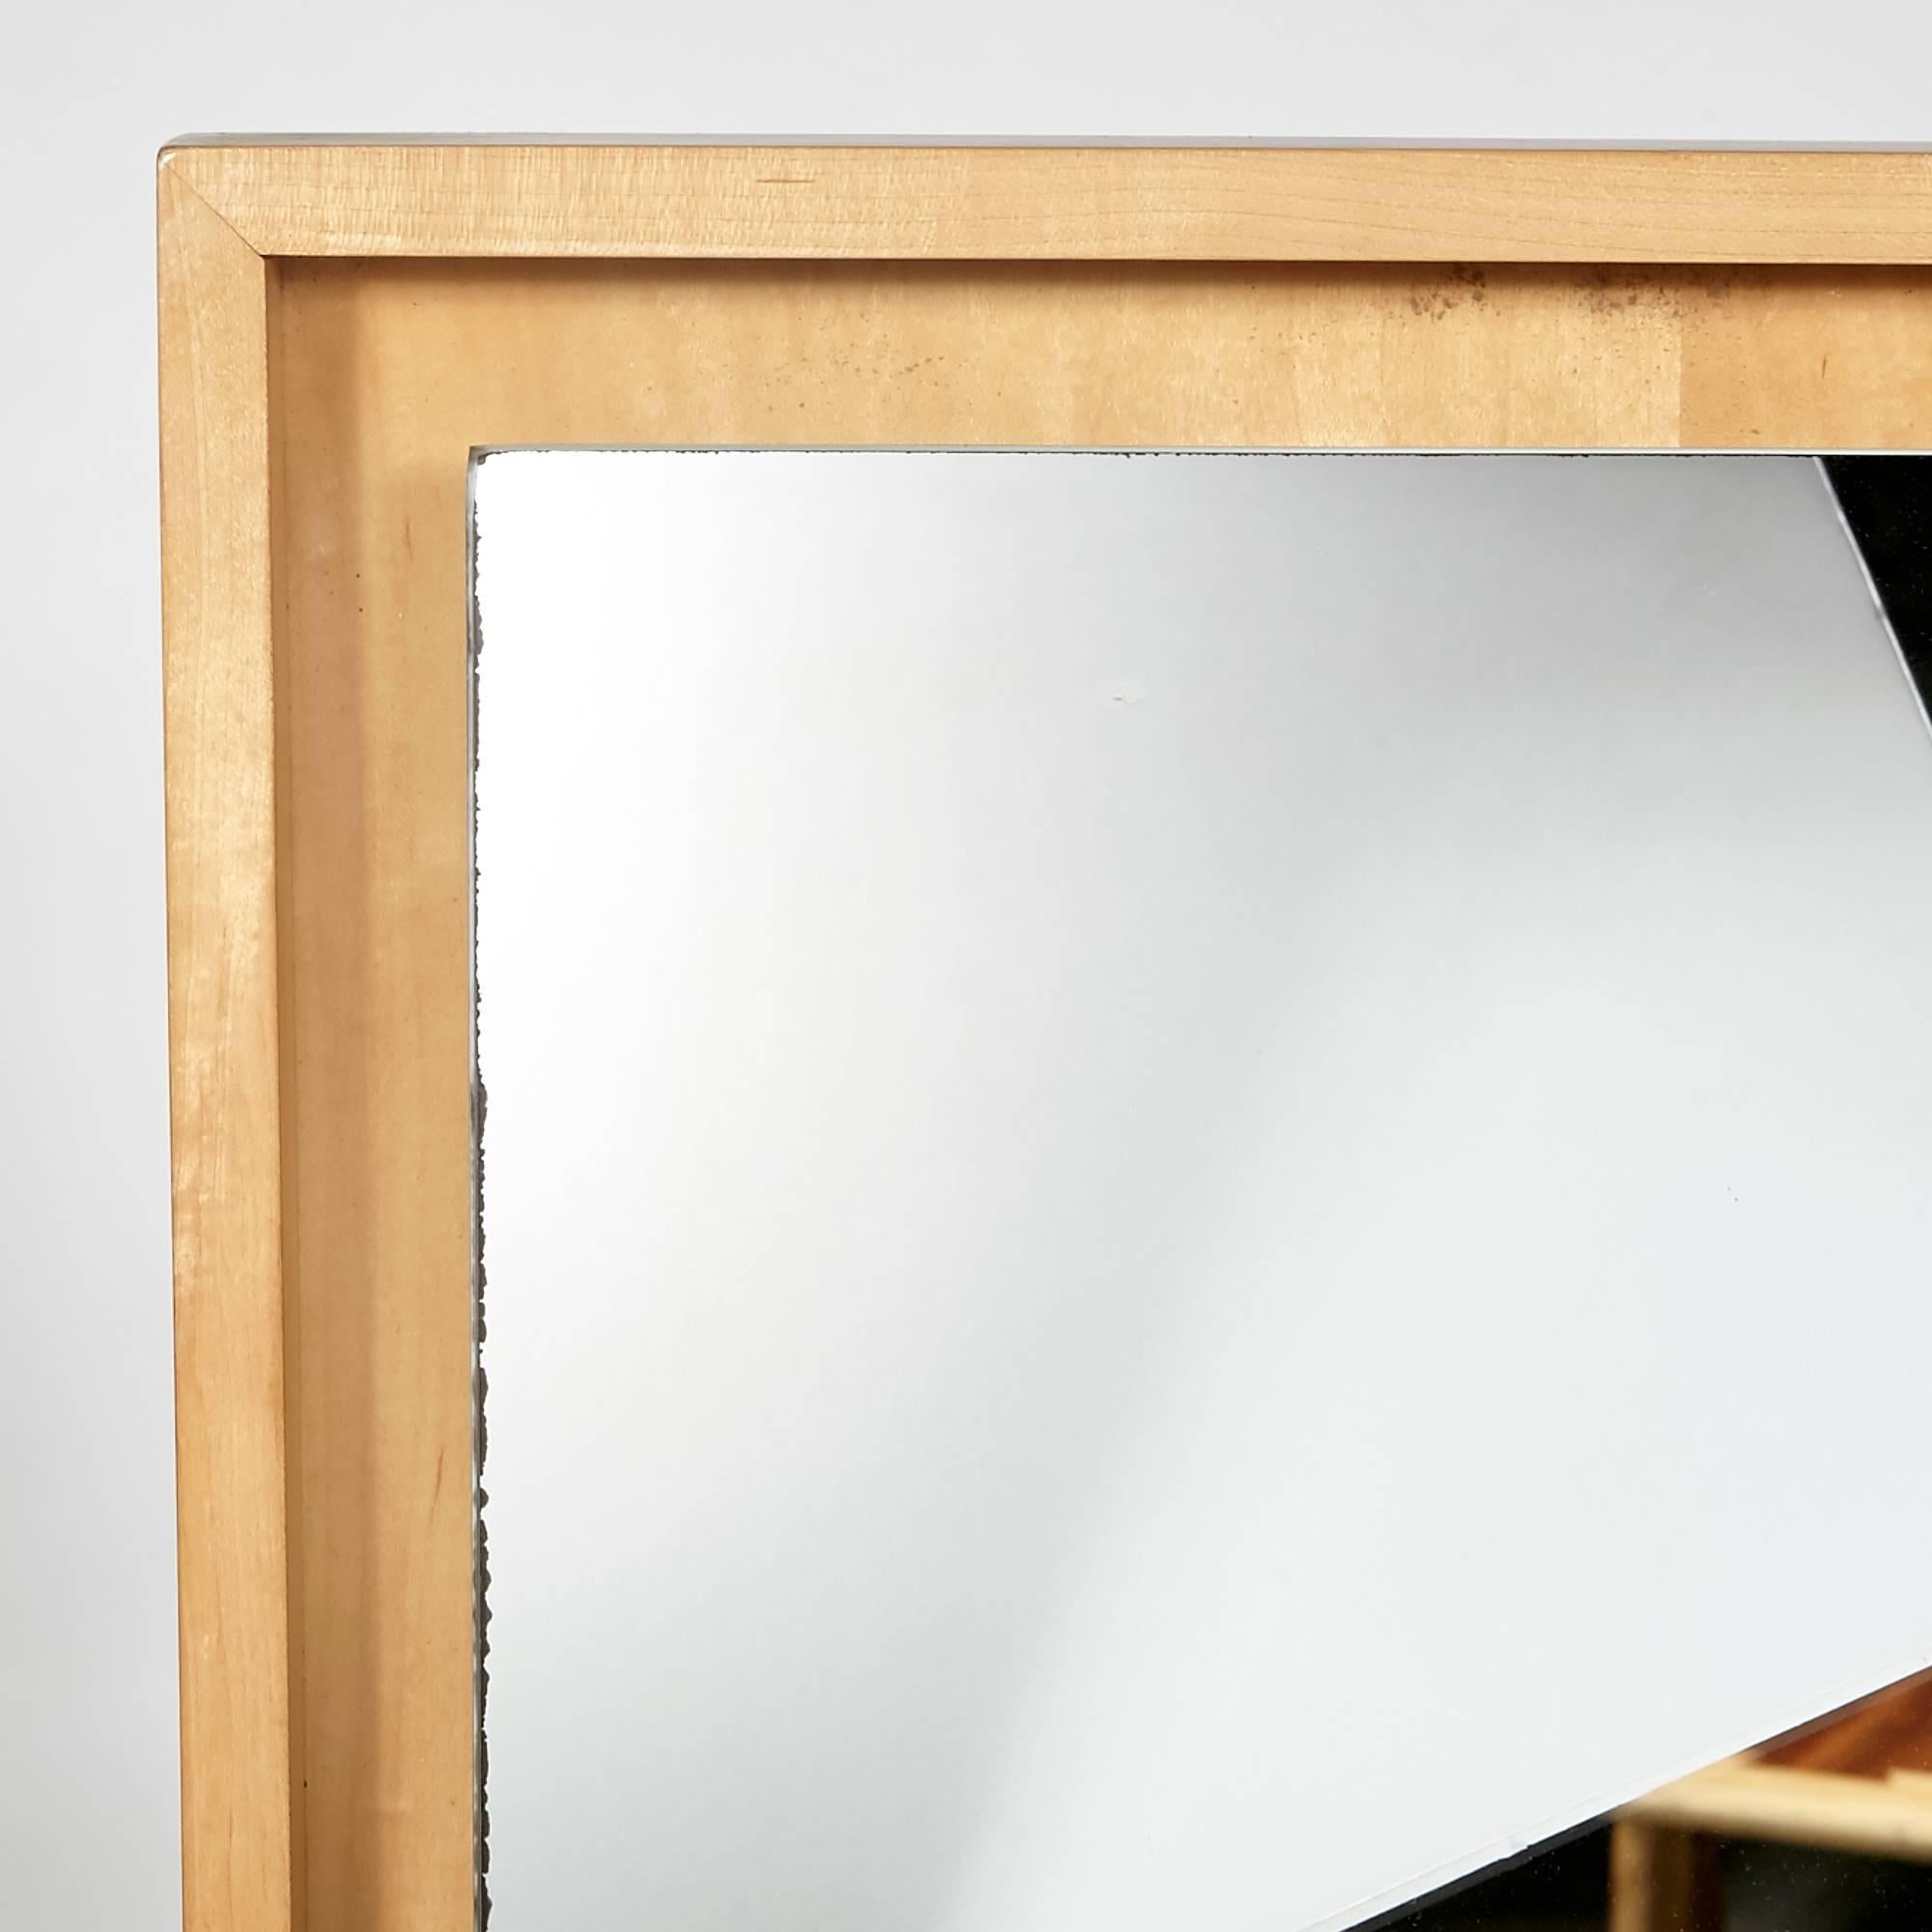 Vintage mid-20th century modern inset maple wood wall mirror with the design attributed to Conant Ball, circa 1960s.